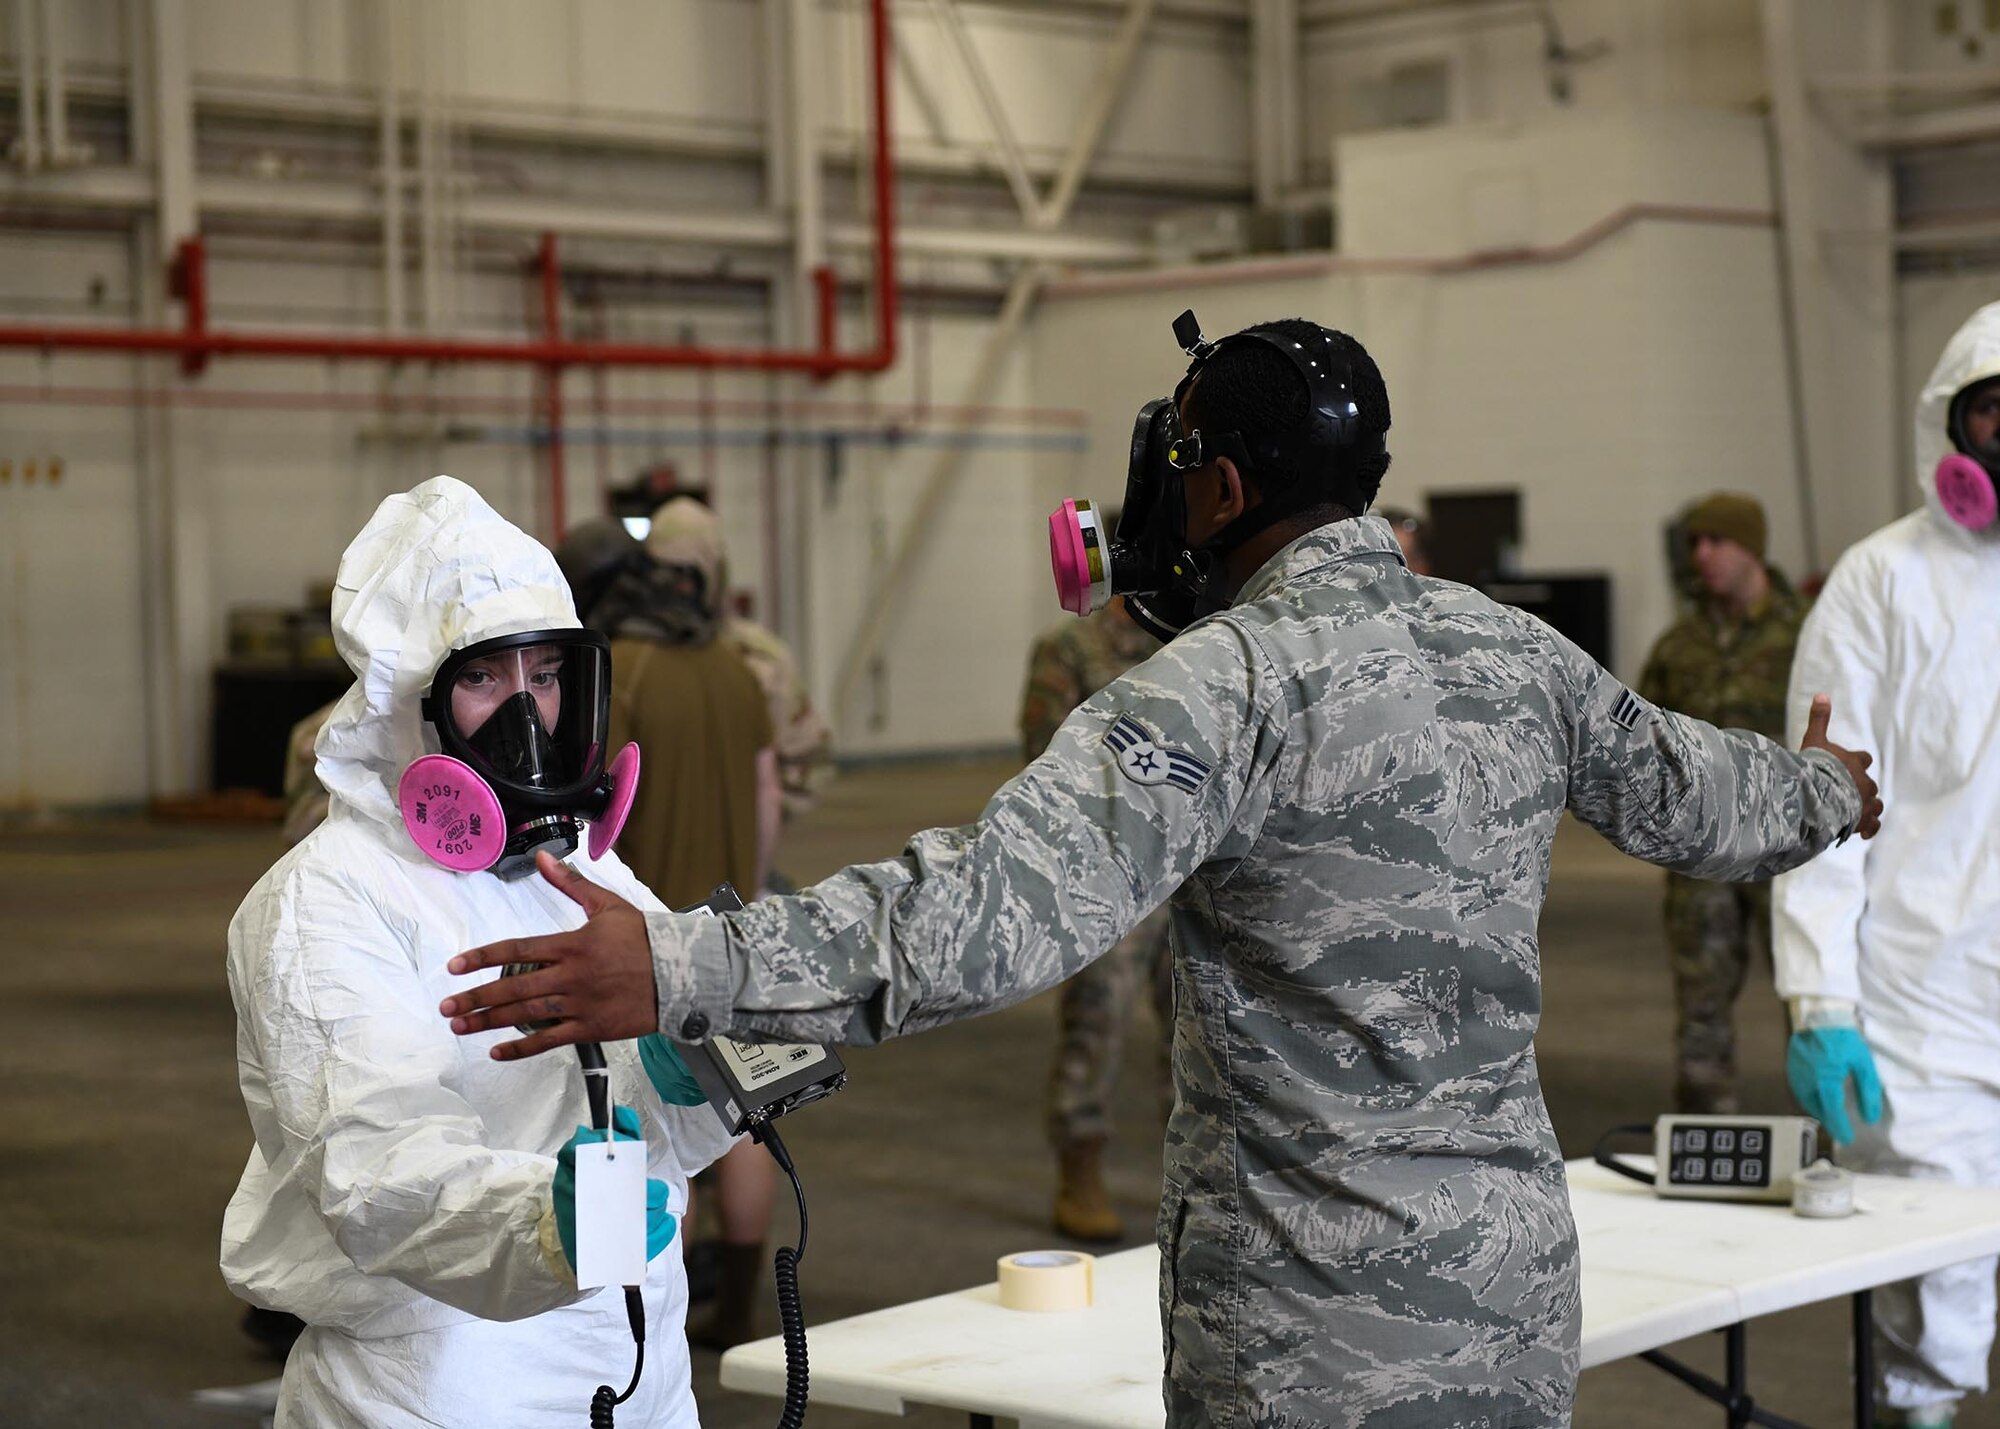 An Airman checks another Airmen for simulated radiation using a small grey tool.